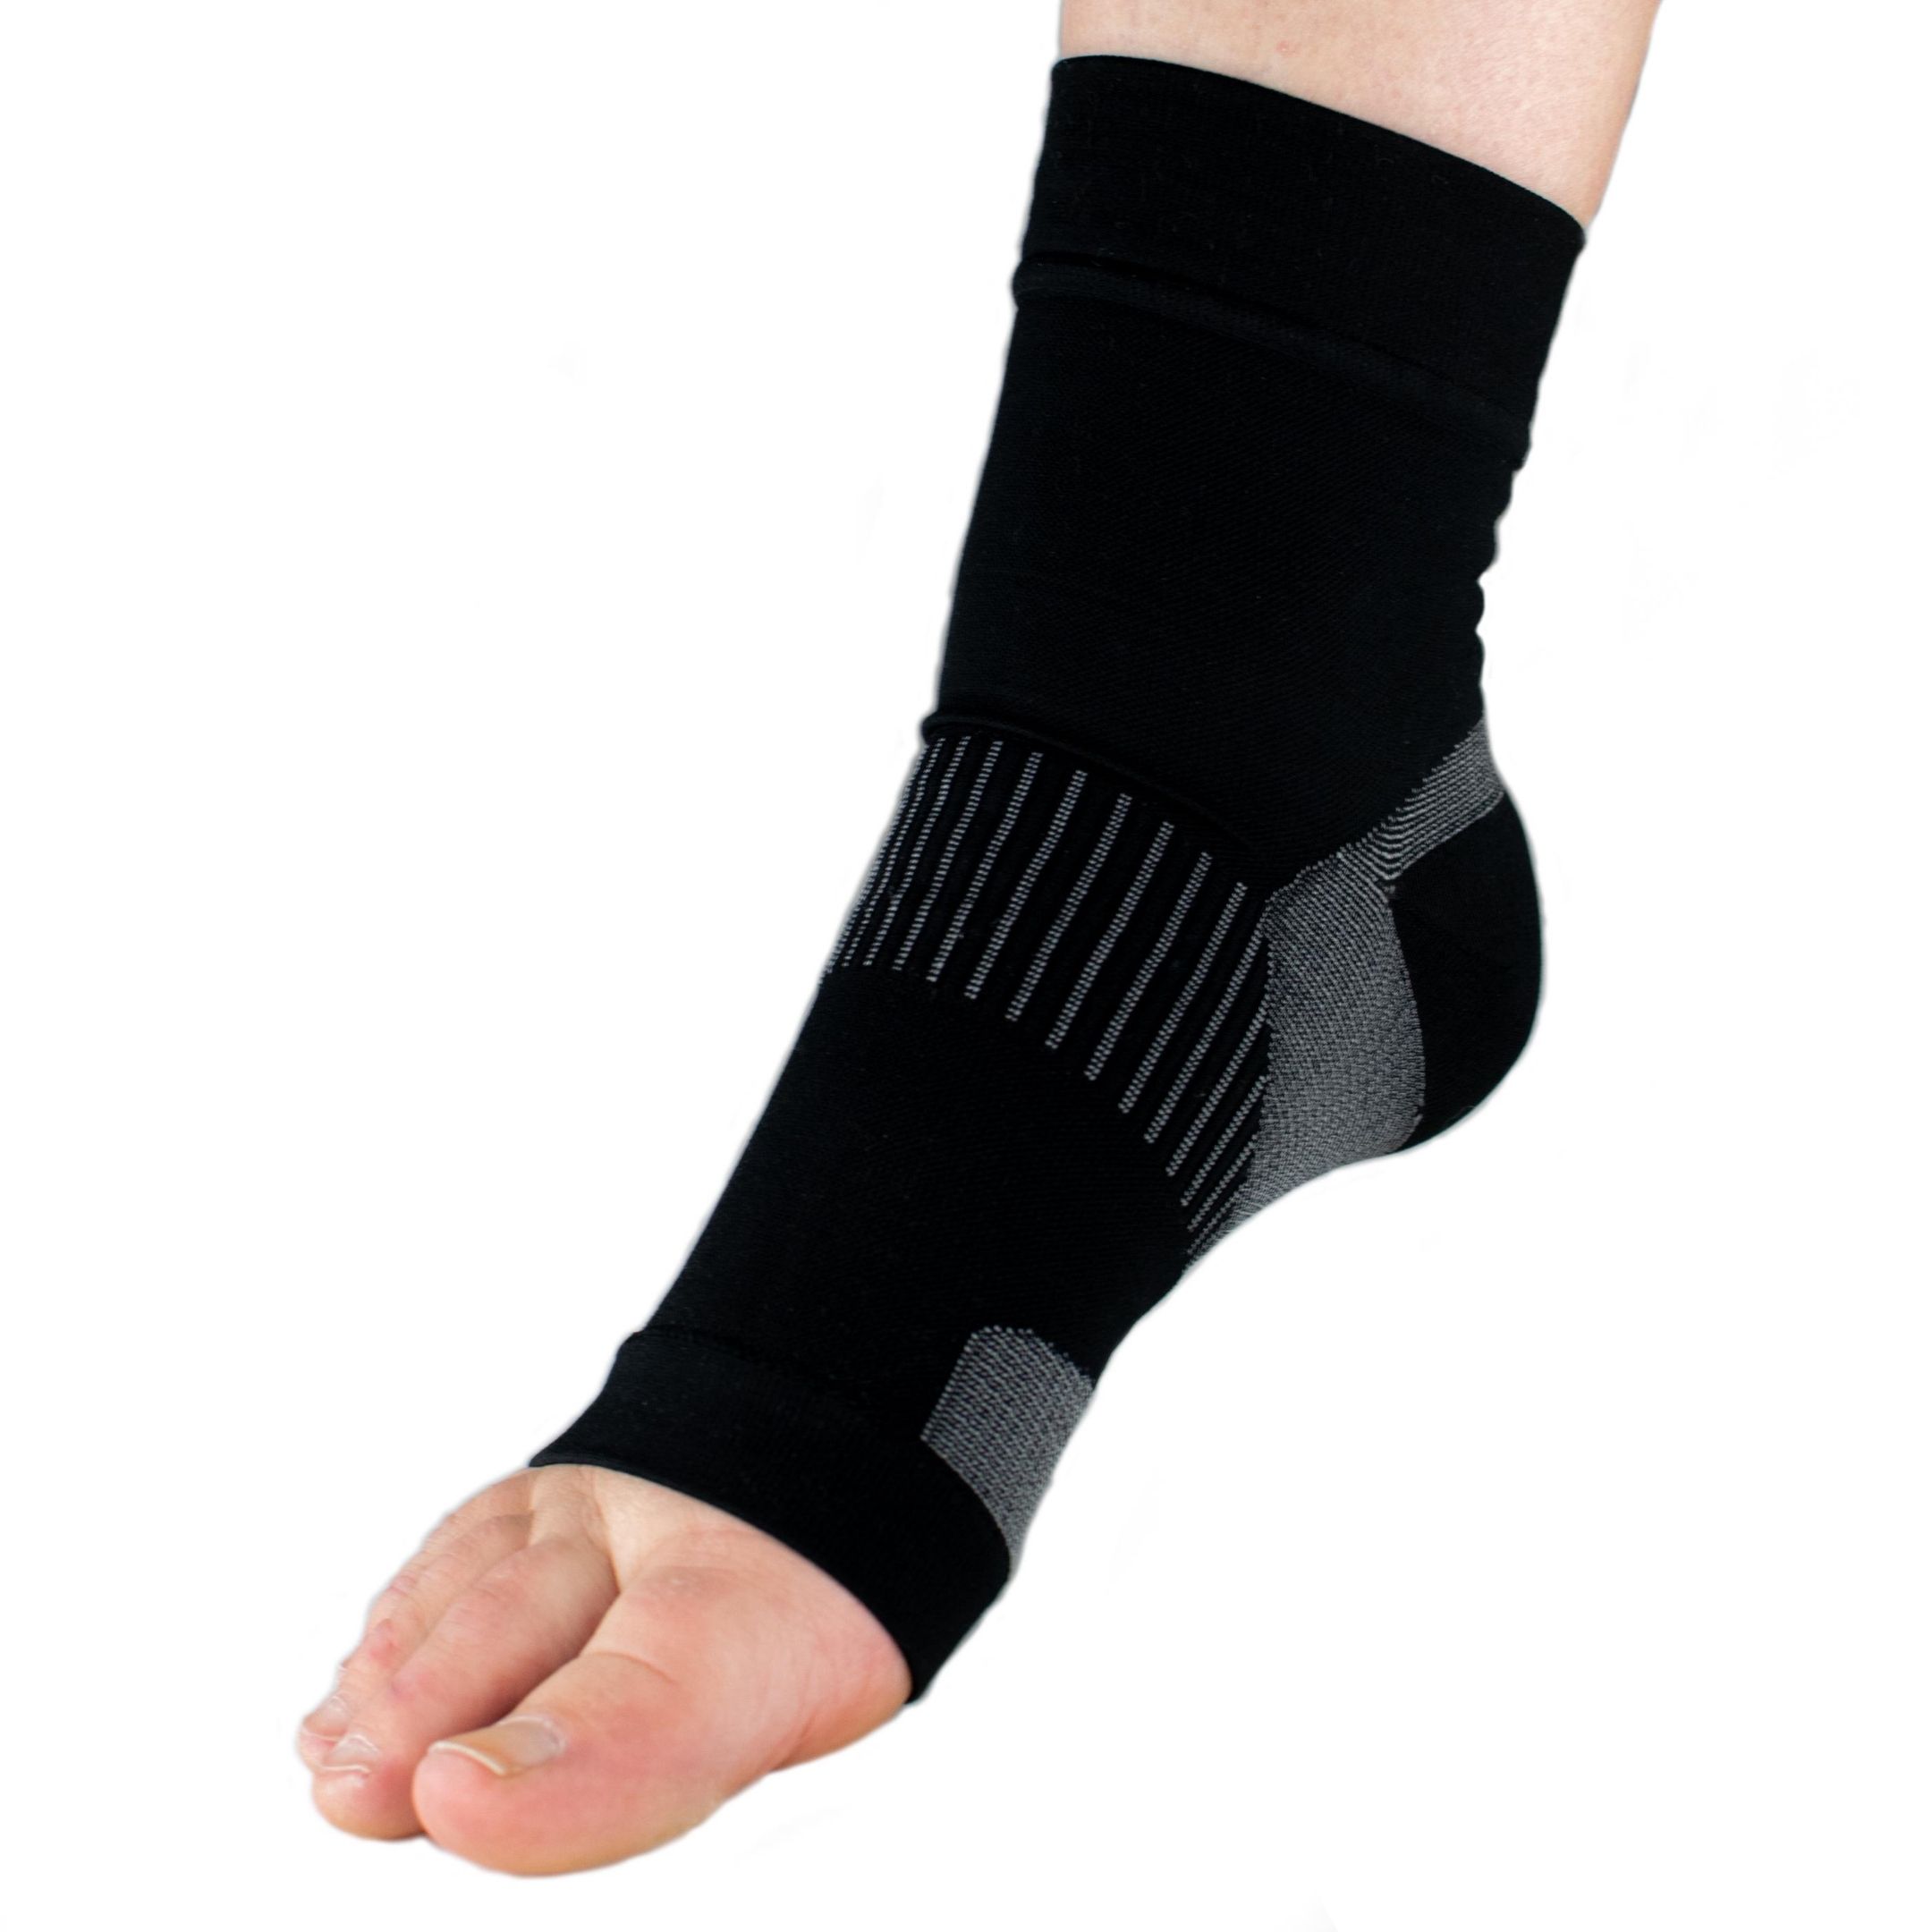 Compression Calf Sleeve - CS-6 Sleeve - The Foot and Ankle Clinic